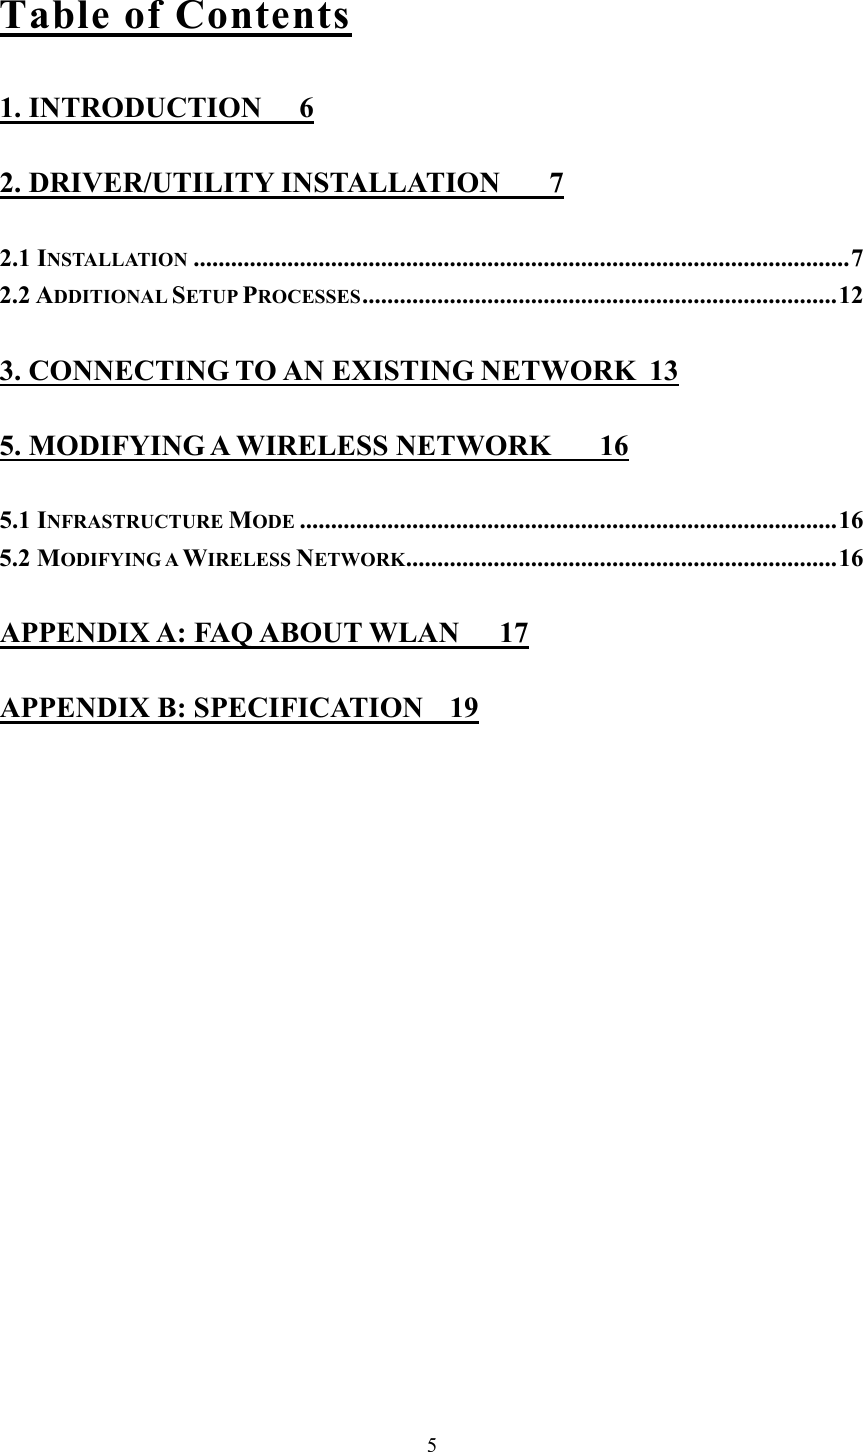  5Table of Contents 1. INTRODUCTION  6 2. DRIVER/UTILITY INSTALLATION  7 2.1 INSTALLATION .........................................................................................................7 2.2 ADDITIONAL SETUP PROCESSES............................................................................12 3. CONNECTING TO AN EXISTING NETWORK  13 5. MODIFYING A WIRELESS NETWORK  16 5.1 INFRASTRUCTURE MODE ......................................................................................16 5.2 MODIFYING A WIRELESS NETWORK.....................................................................16 APPENDIX A: FAQ ABOUT WLAN  17 APPENDIX B: SPECIFICATION  19 